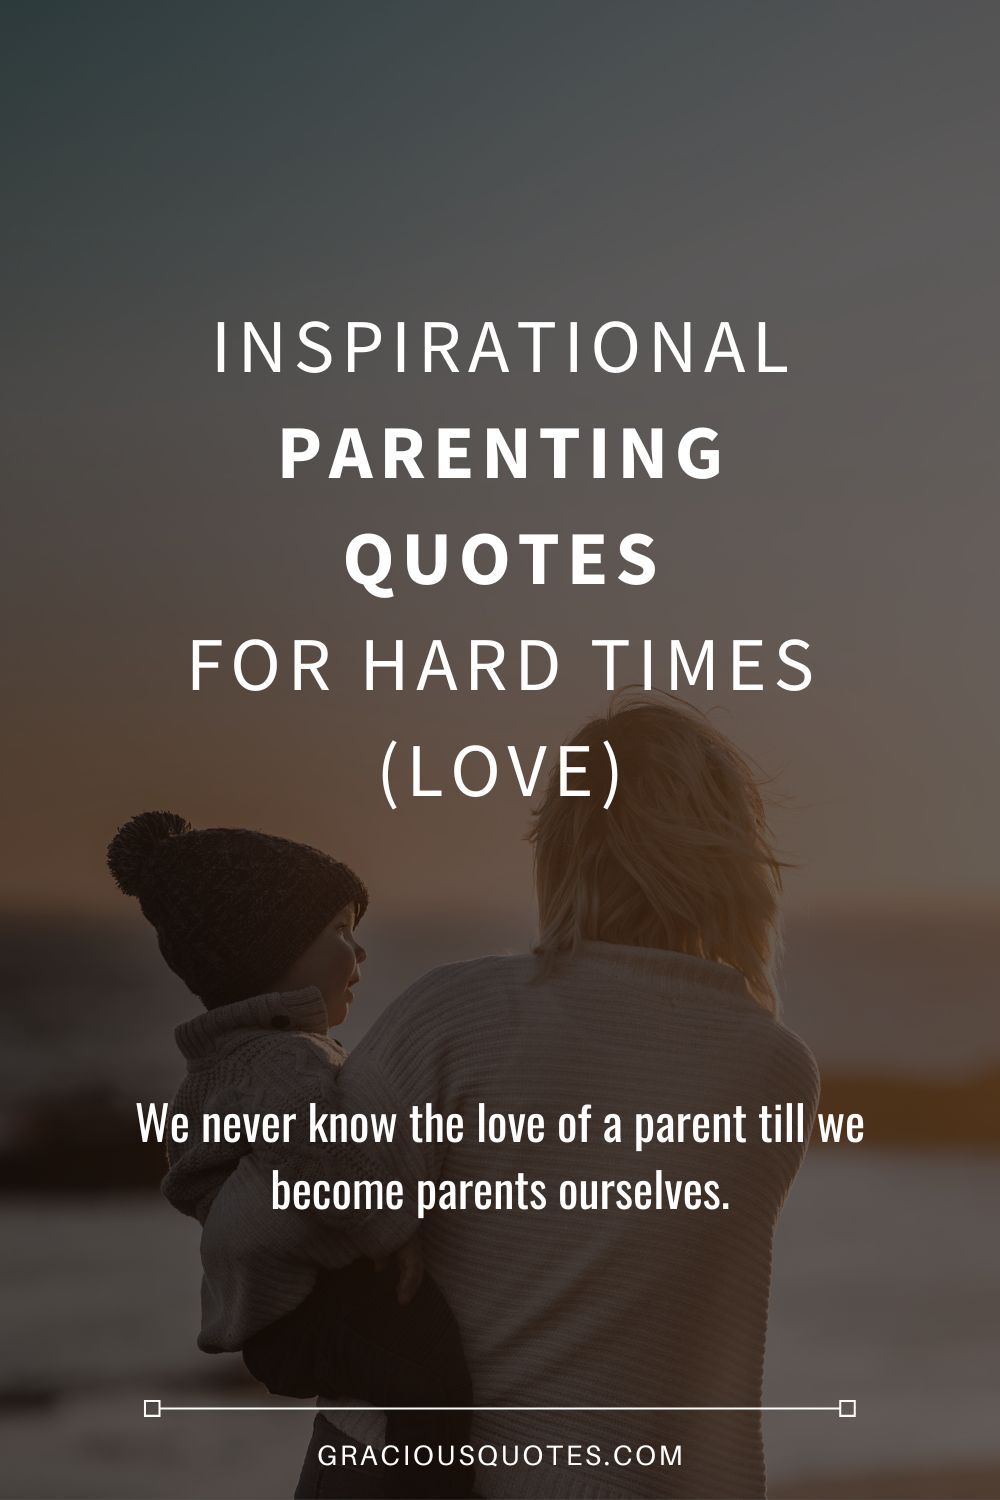 79 Uplifting Quotes About Caring for Elderly Parents | Sassy Sister Stuff